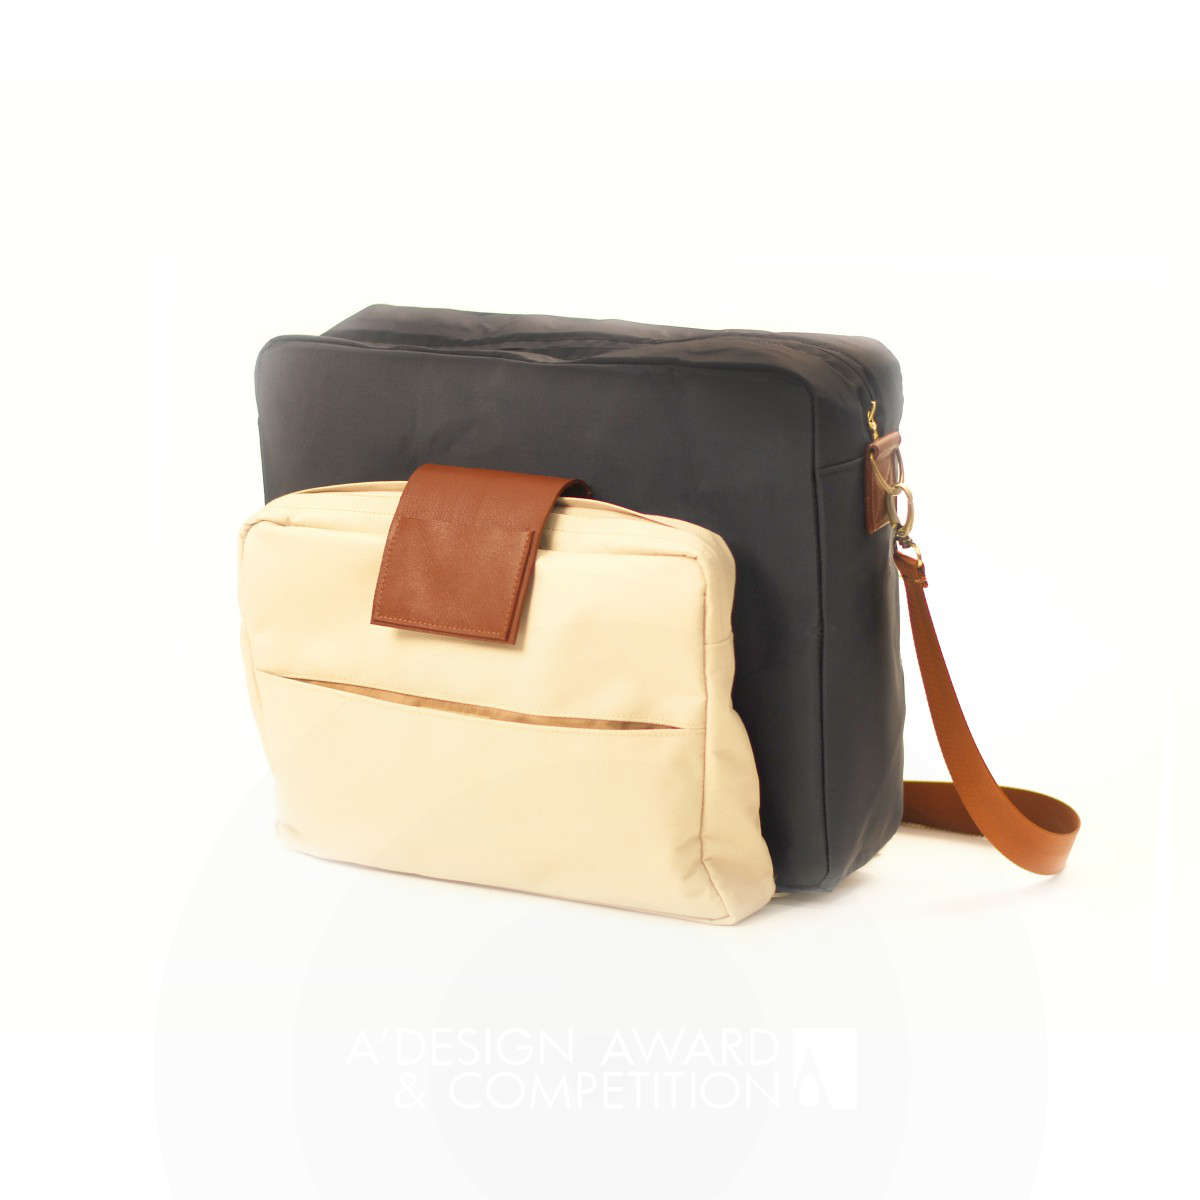 Collectote Multifunctional Bag by Yun Hsin Lee